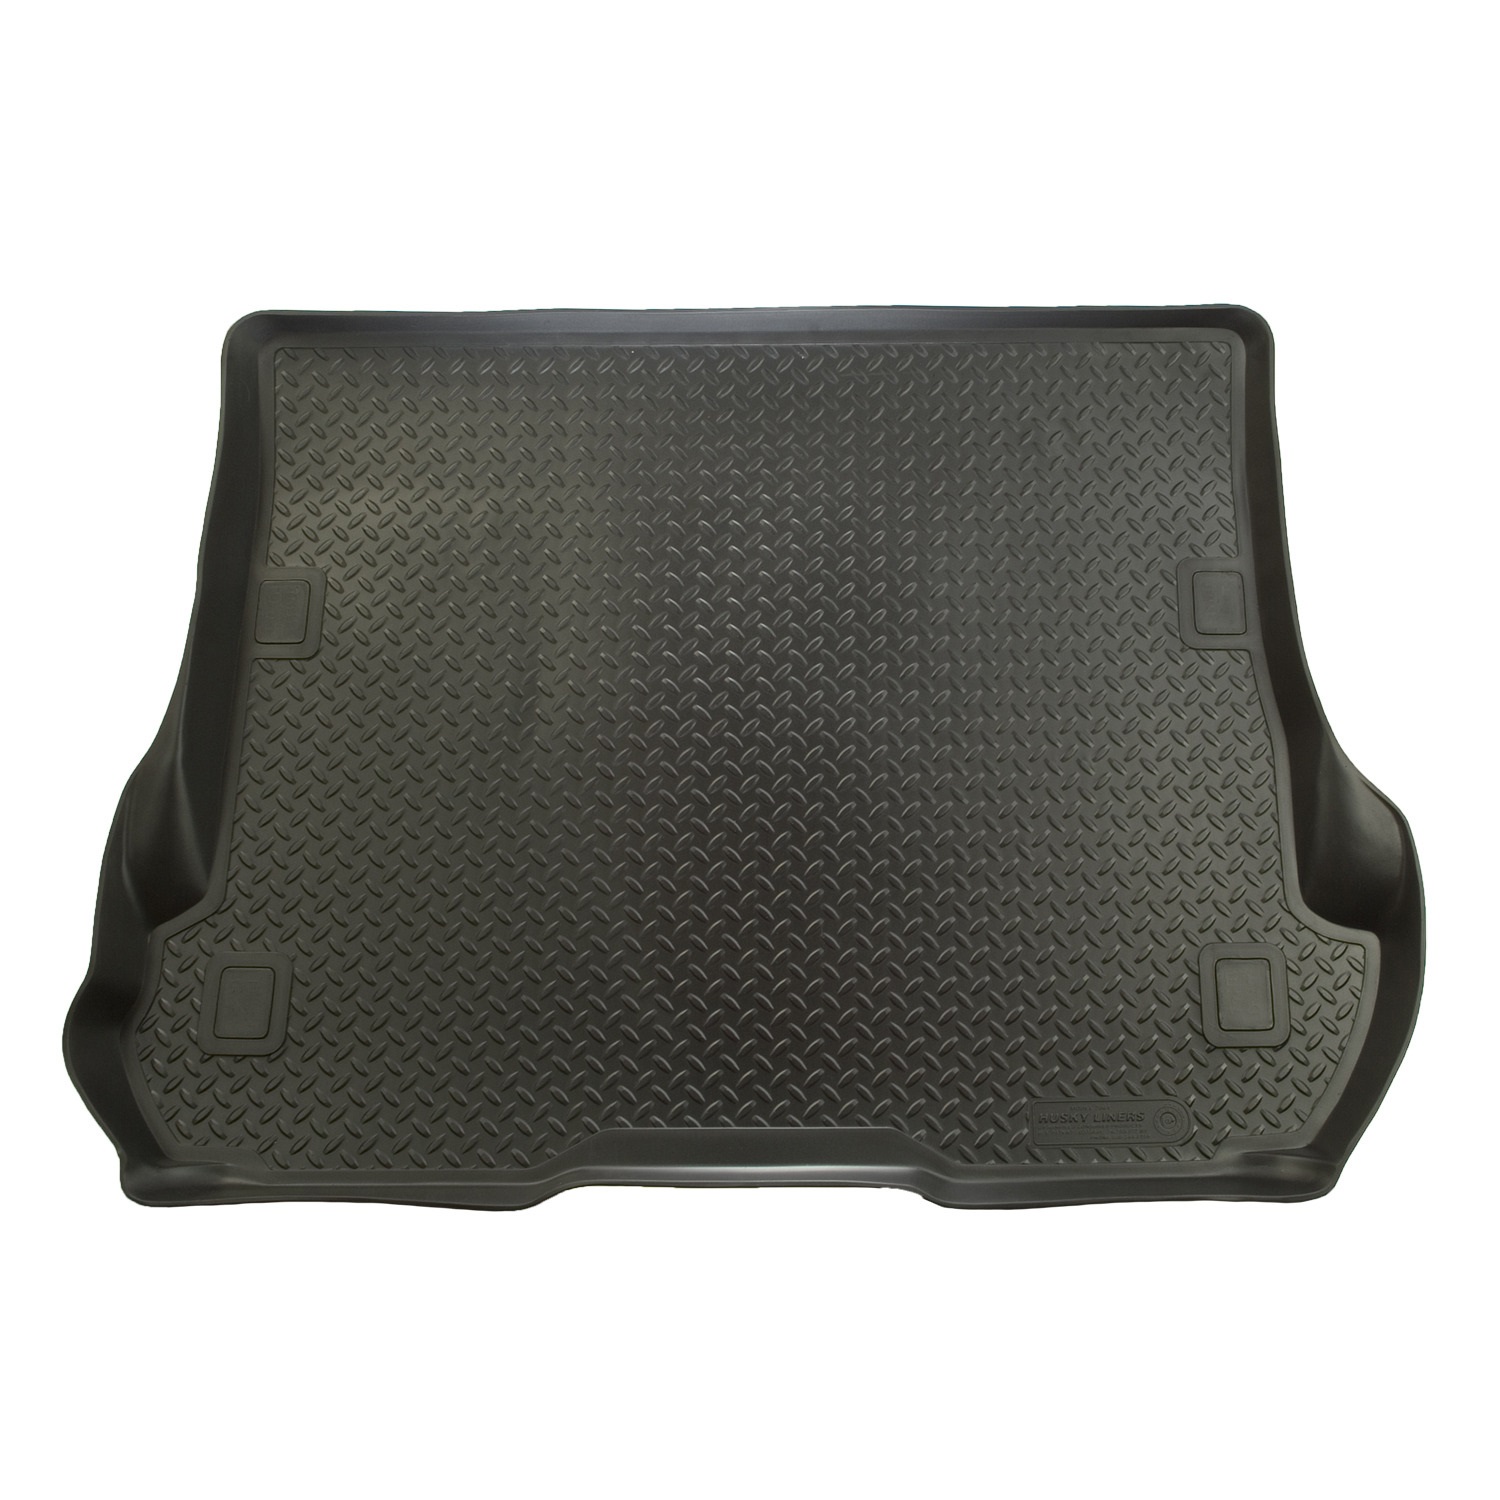 Husky Liners Husky Liners 26251 Classic Style; Cargo Liner Fits 05-12 Pathfinder